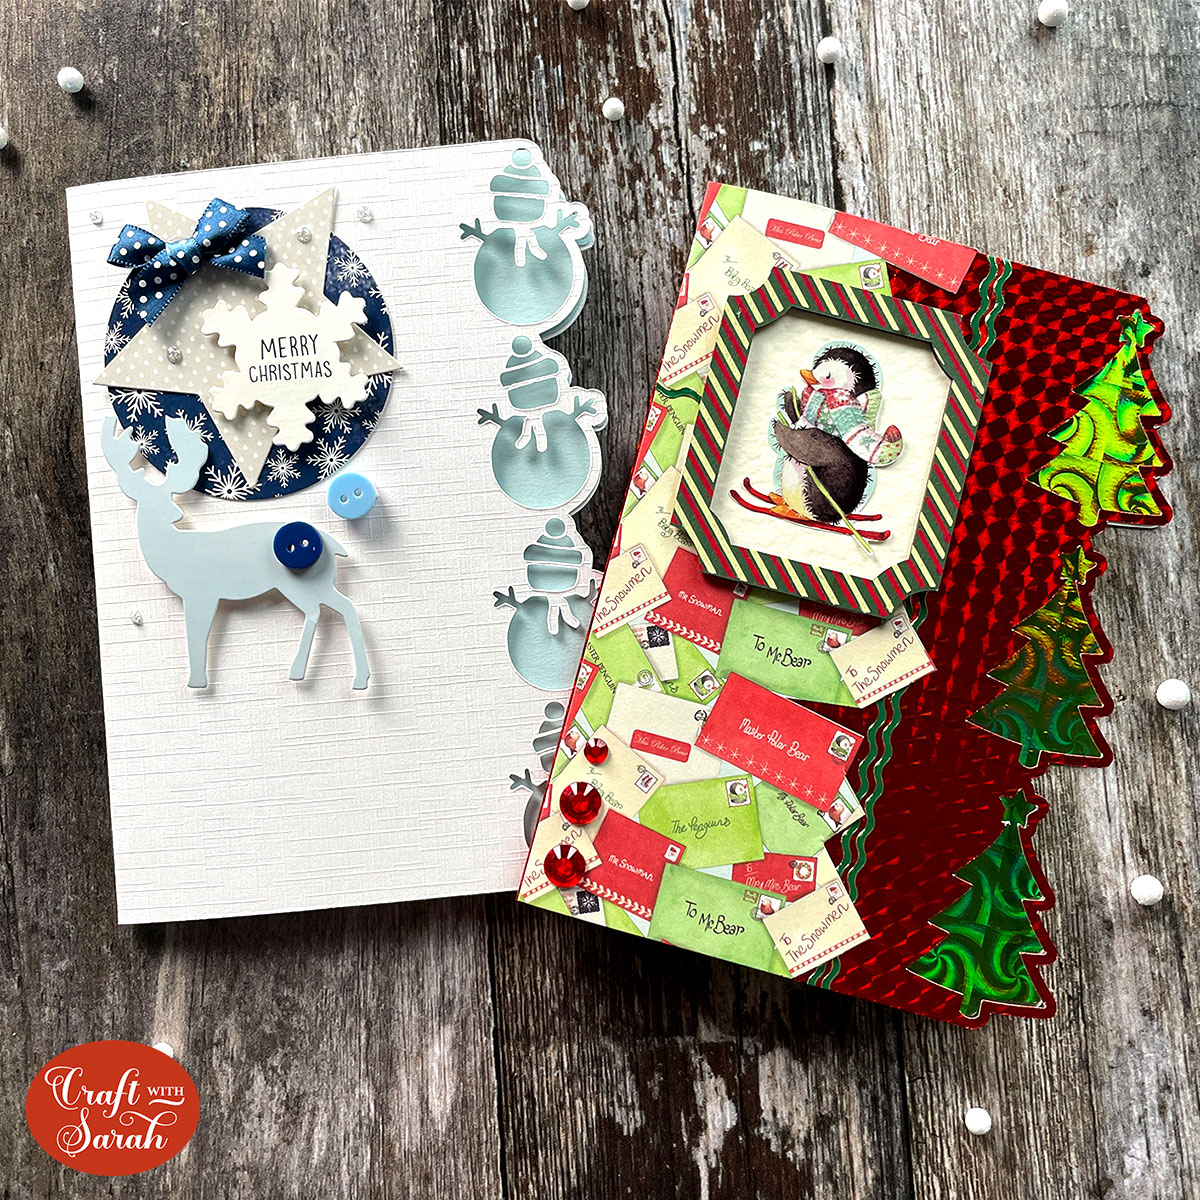 DIY Greeting Cards from File Folders and Scrapbooking Supplies